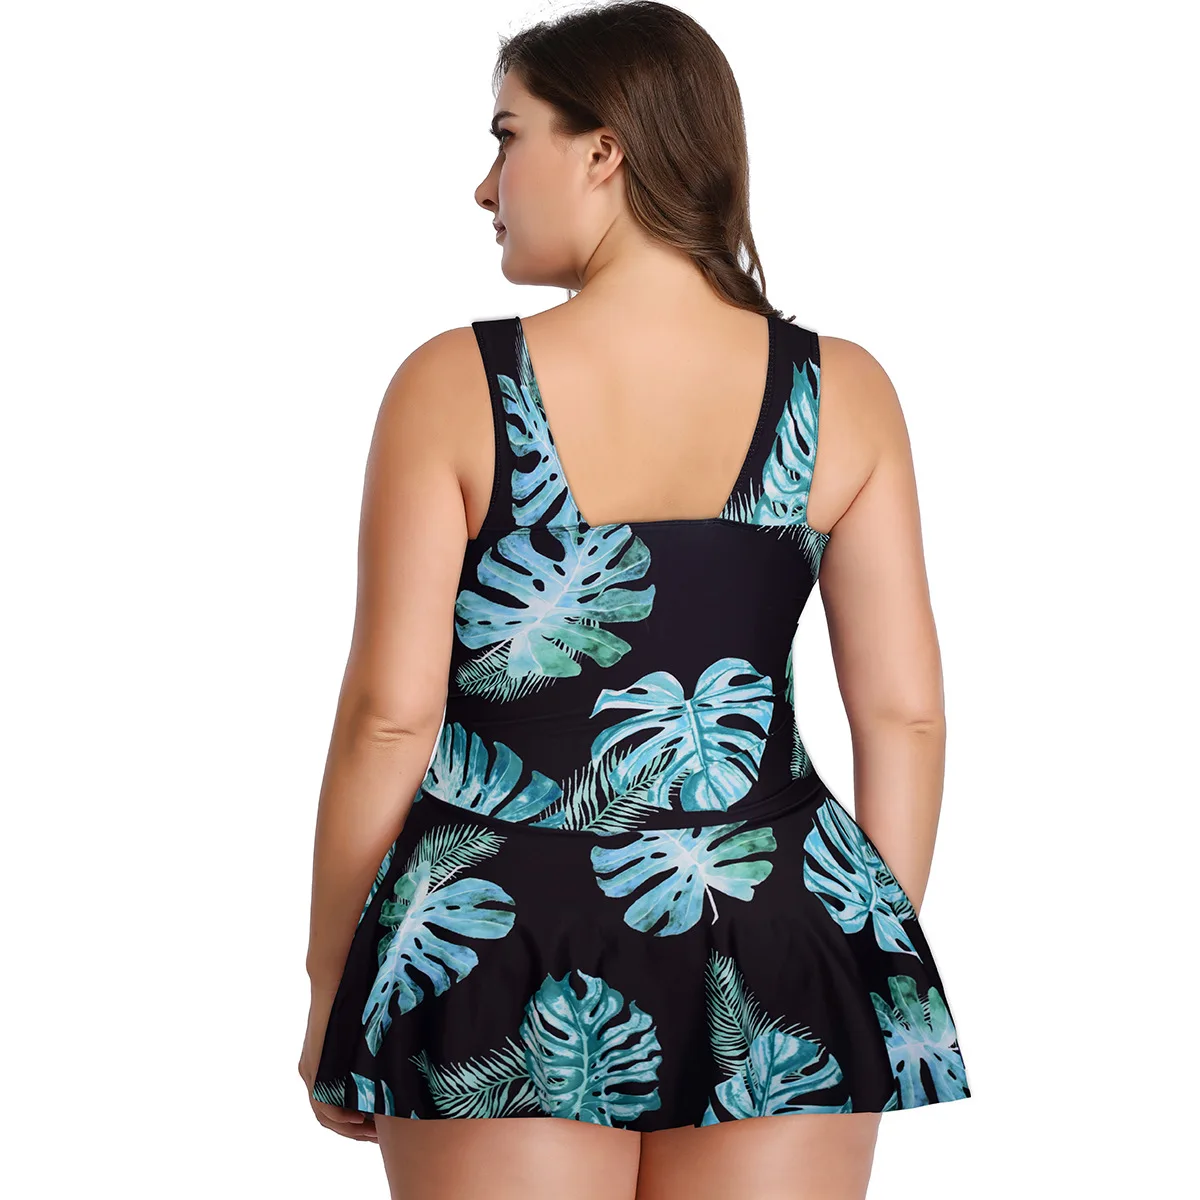 Summer 2023 Swimsuits Women Bikini Set Corset Swimwear S-5XL Beach Outfits Plus Size Swimsuit With Cover Up Girls Bathing Suit